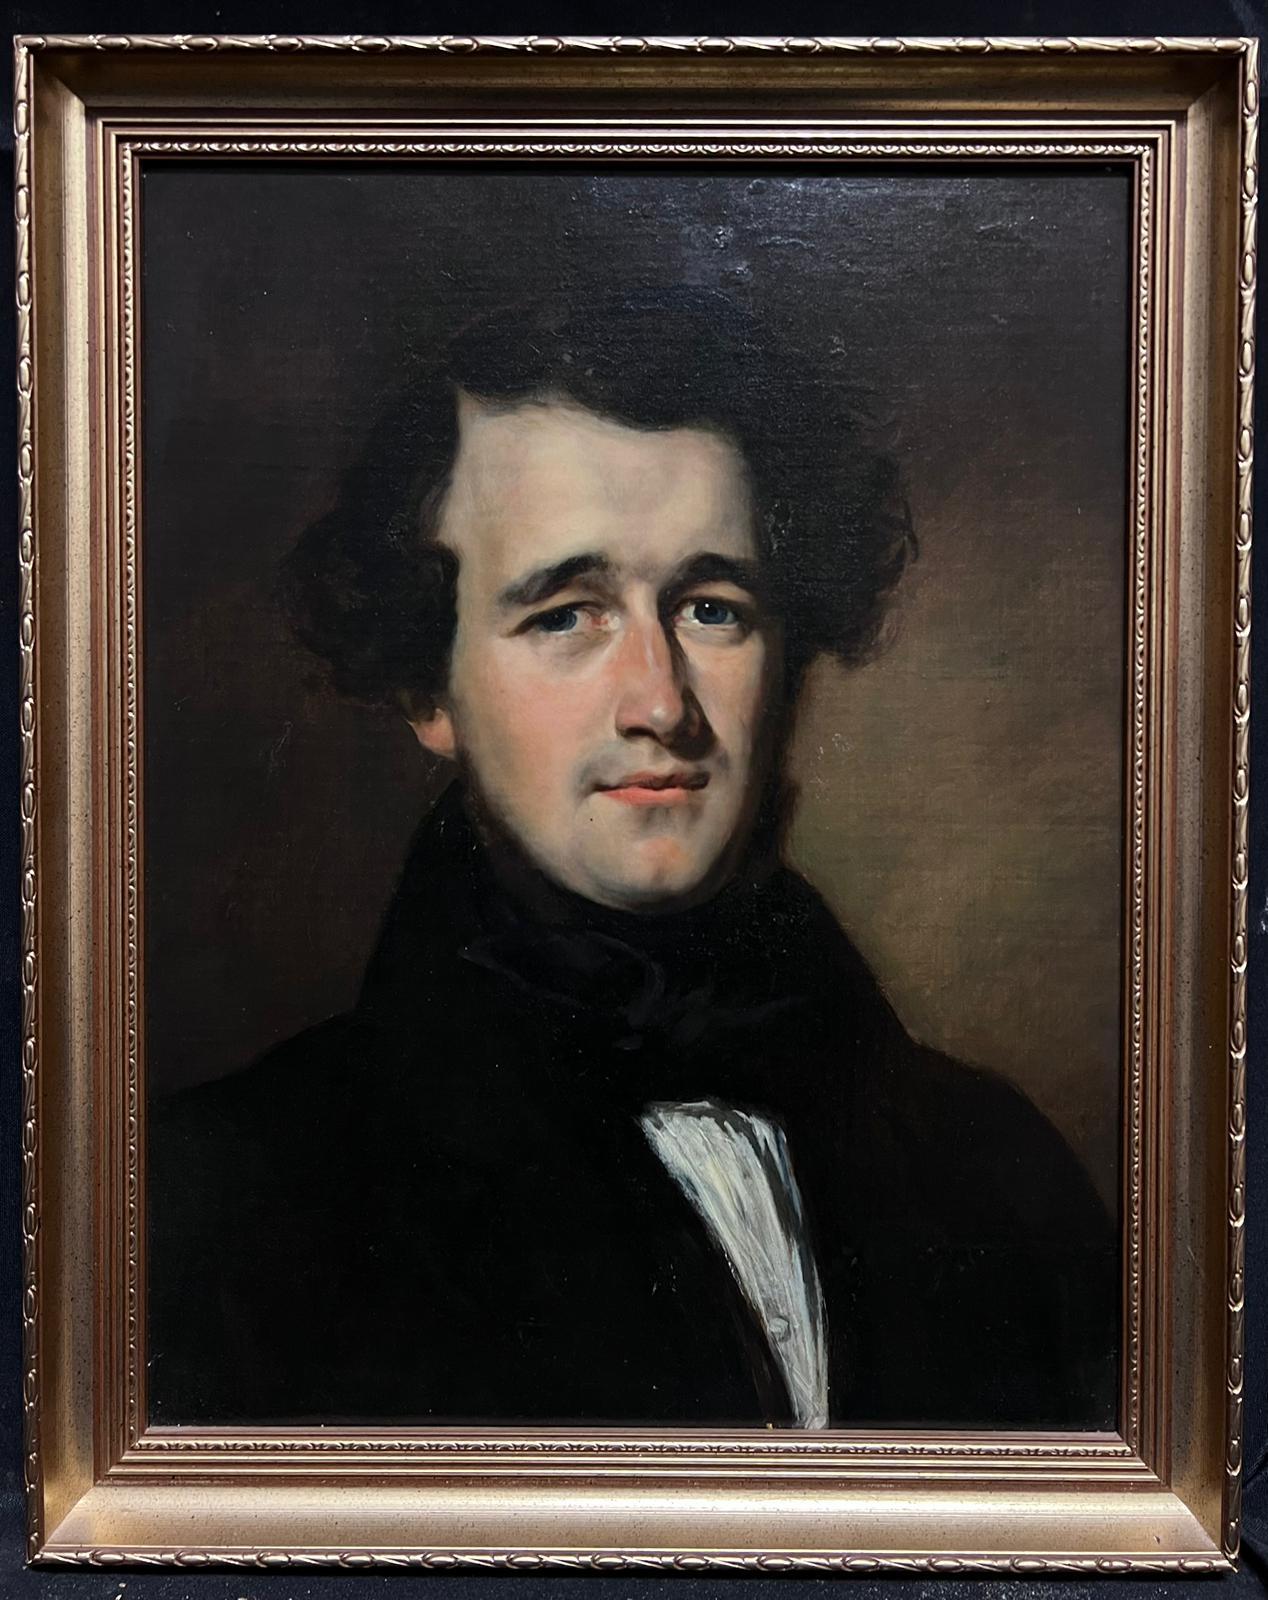 Fine Victorian Portrait of a Gentleman Original 1870's English Oil Painting - Black Figurative Painting by Victorian English